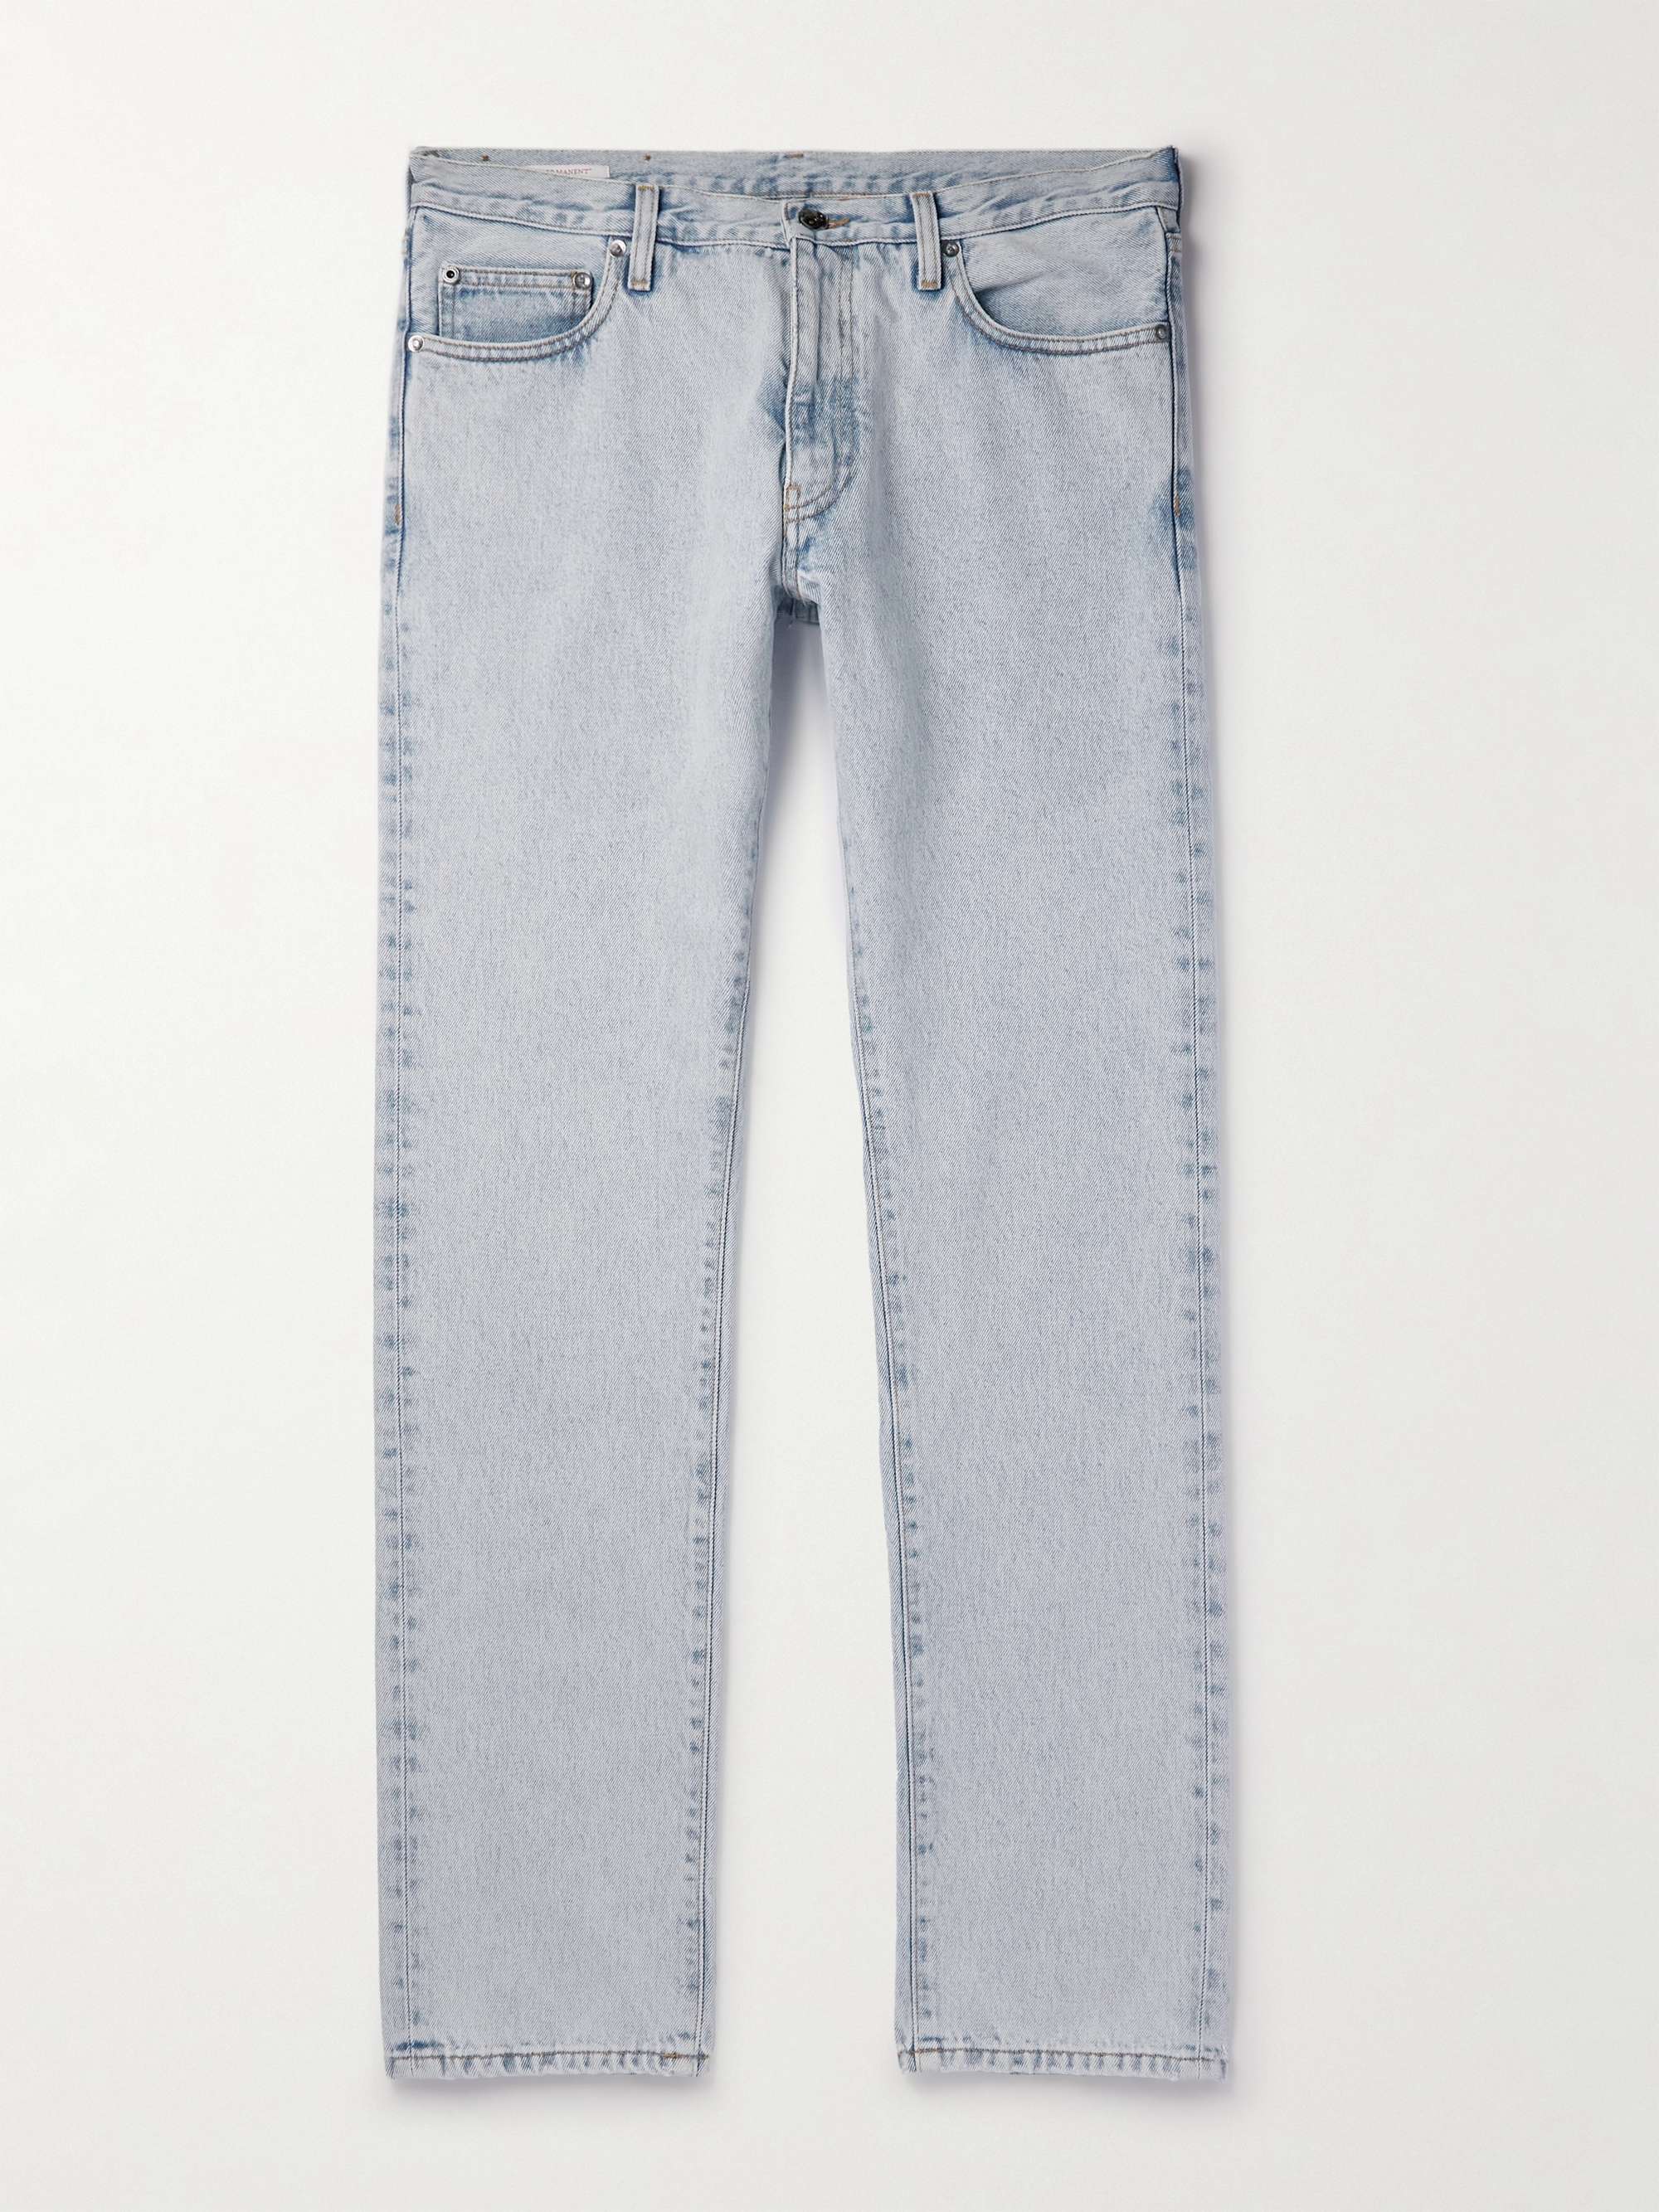 OFF-WHITE Single Arrow Straight-Leg Suede-Trimmed Printed Jeans,Light denim